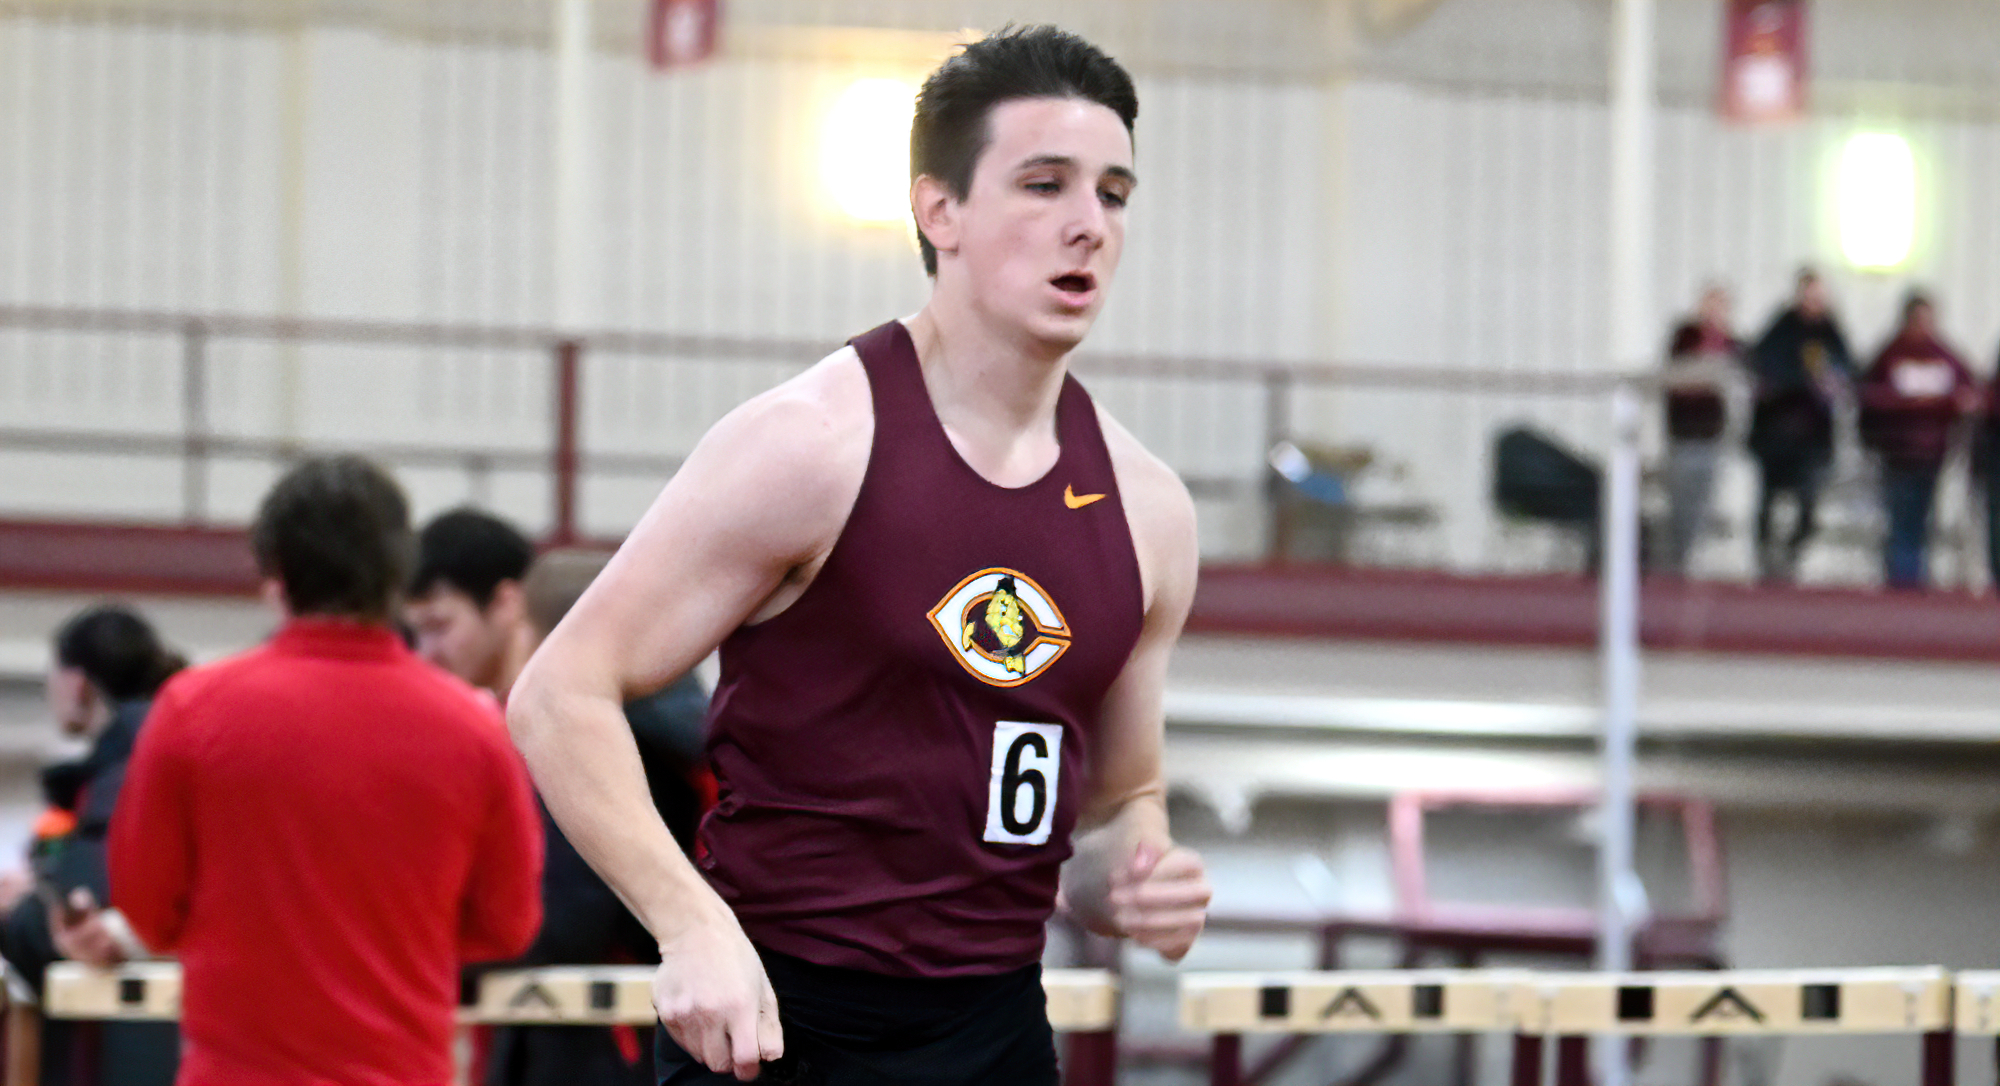 Senior Wade Rhonemus started the final multi-event campaign of his college career by nearly posting a PR in the heptathlon.